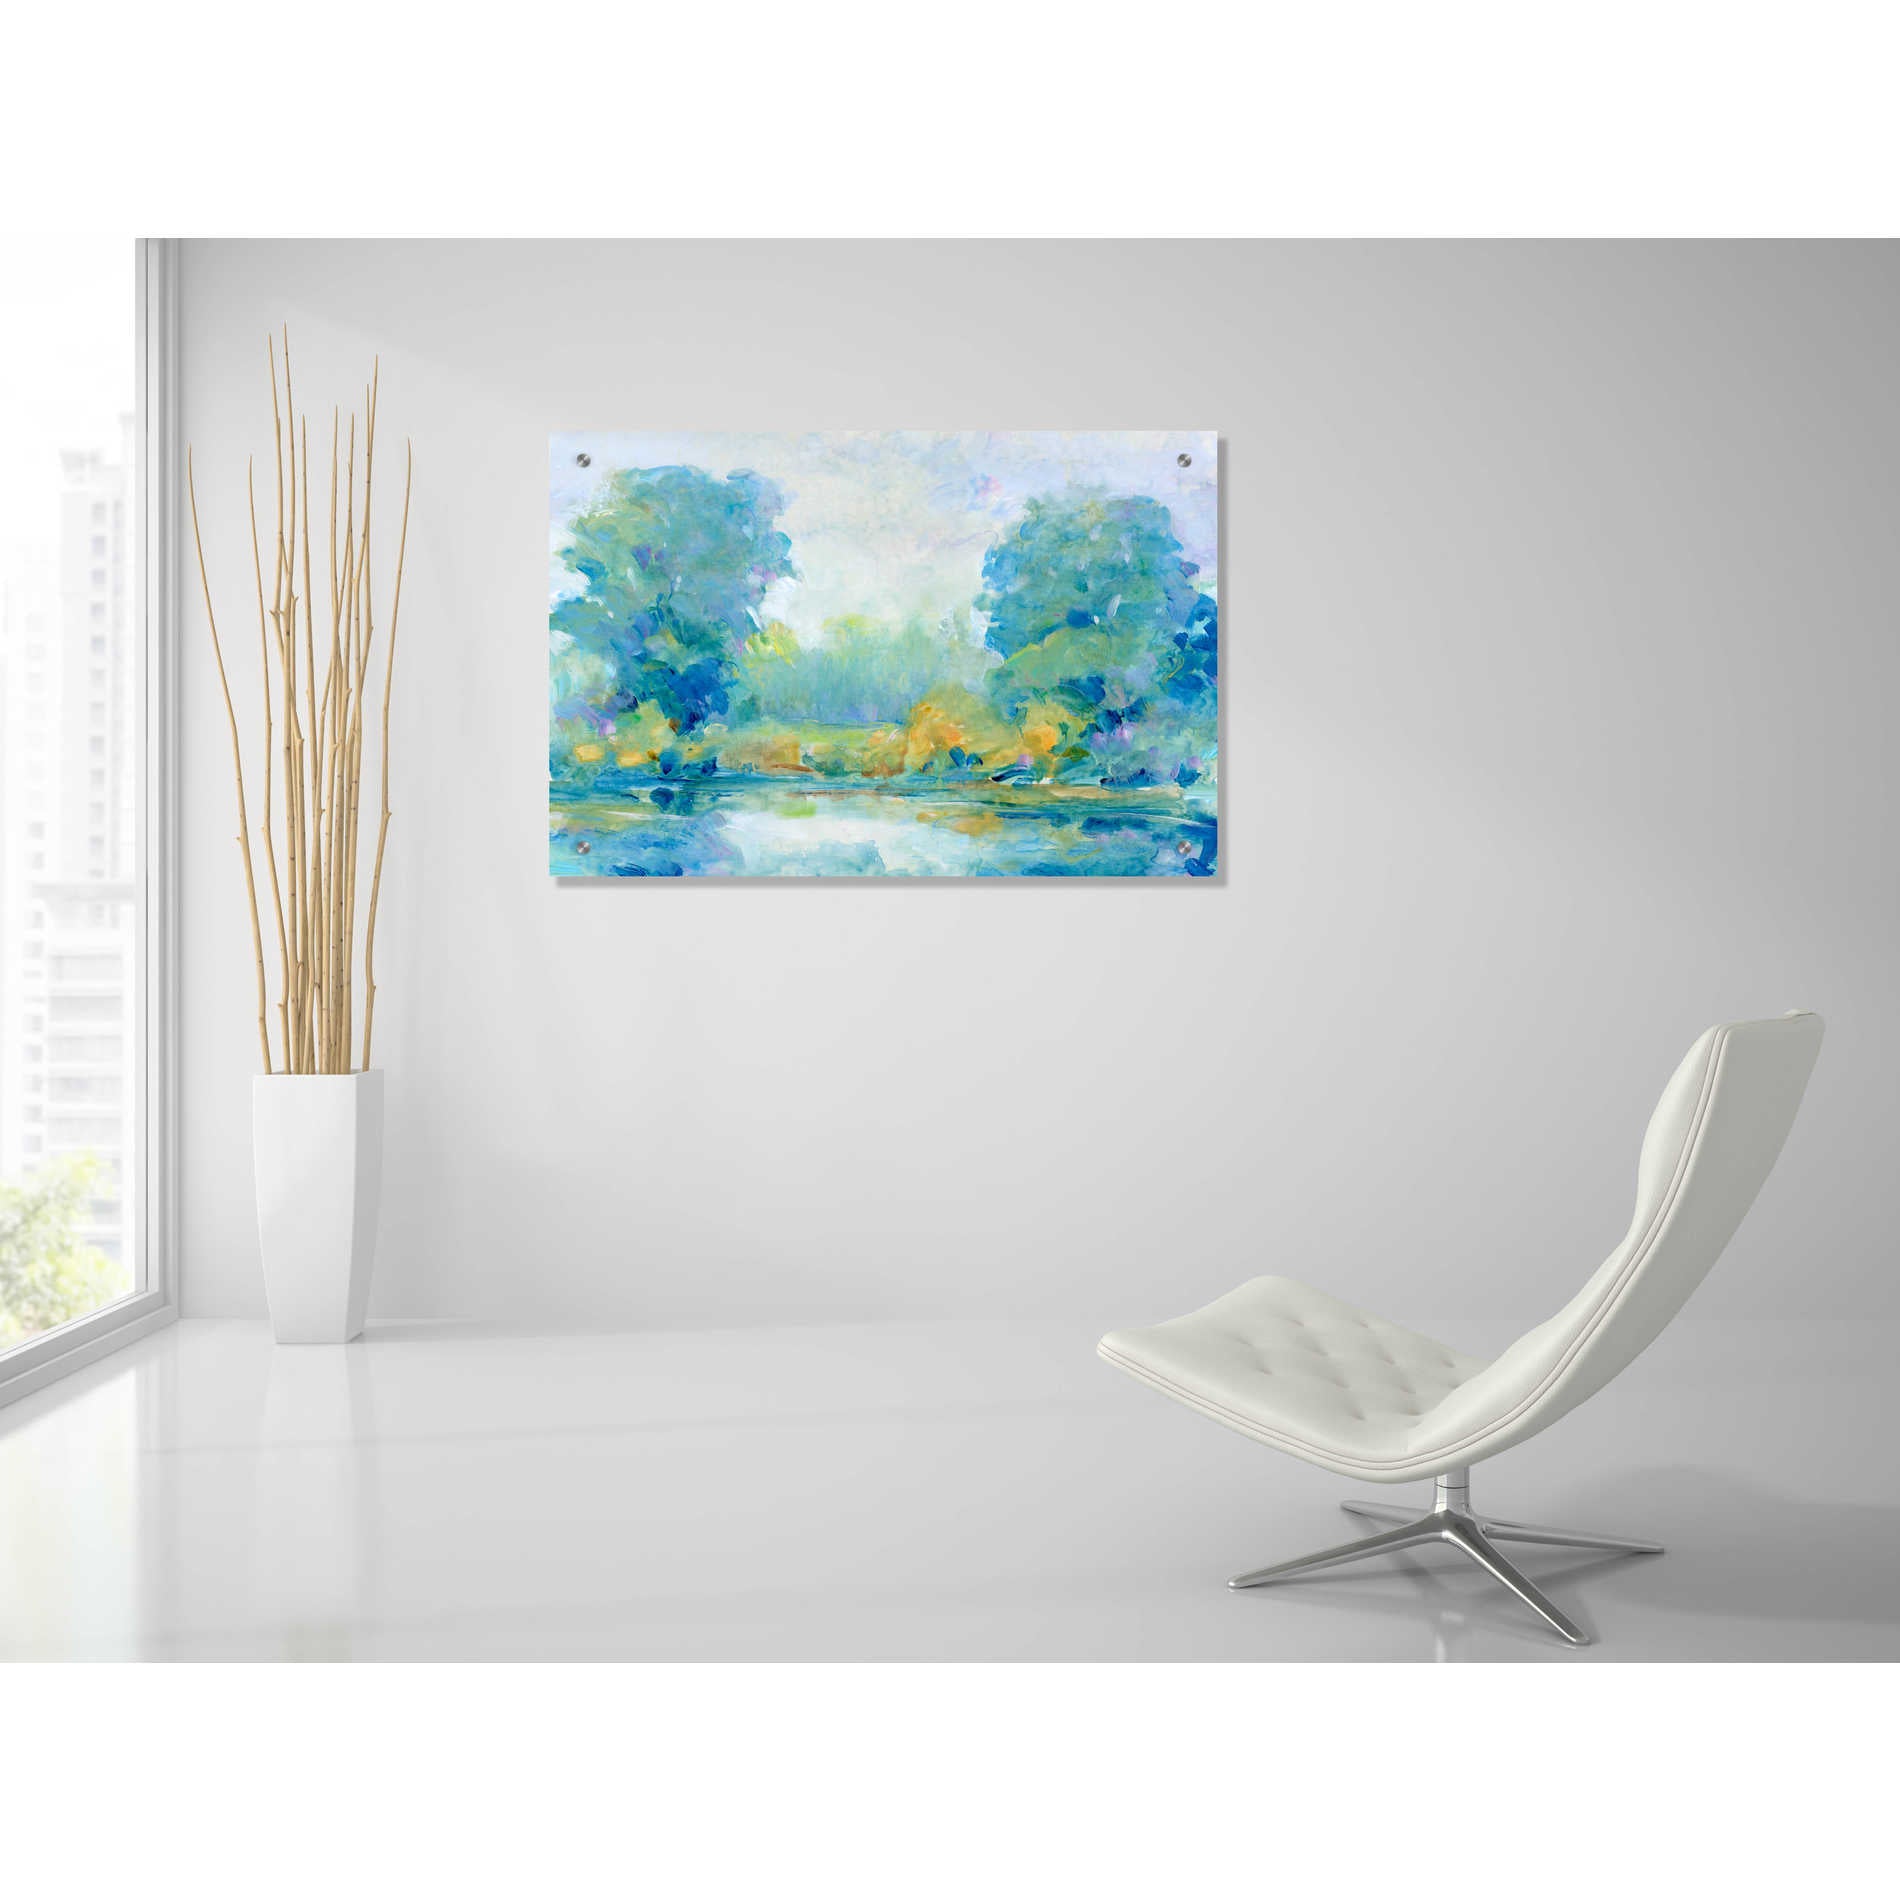 Epic Art 'Quiet Morning I' by Tim O'Toole, Acrylic Glass Wall Art,36x24